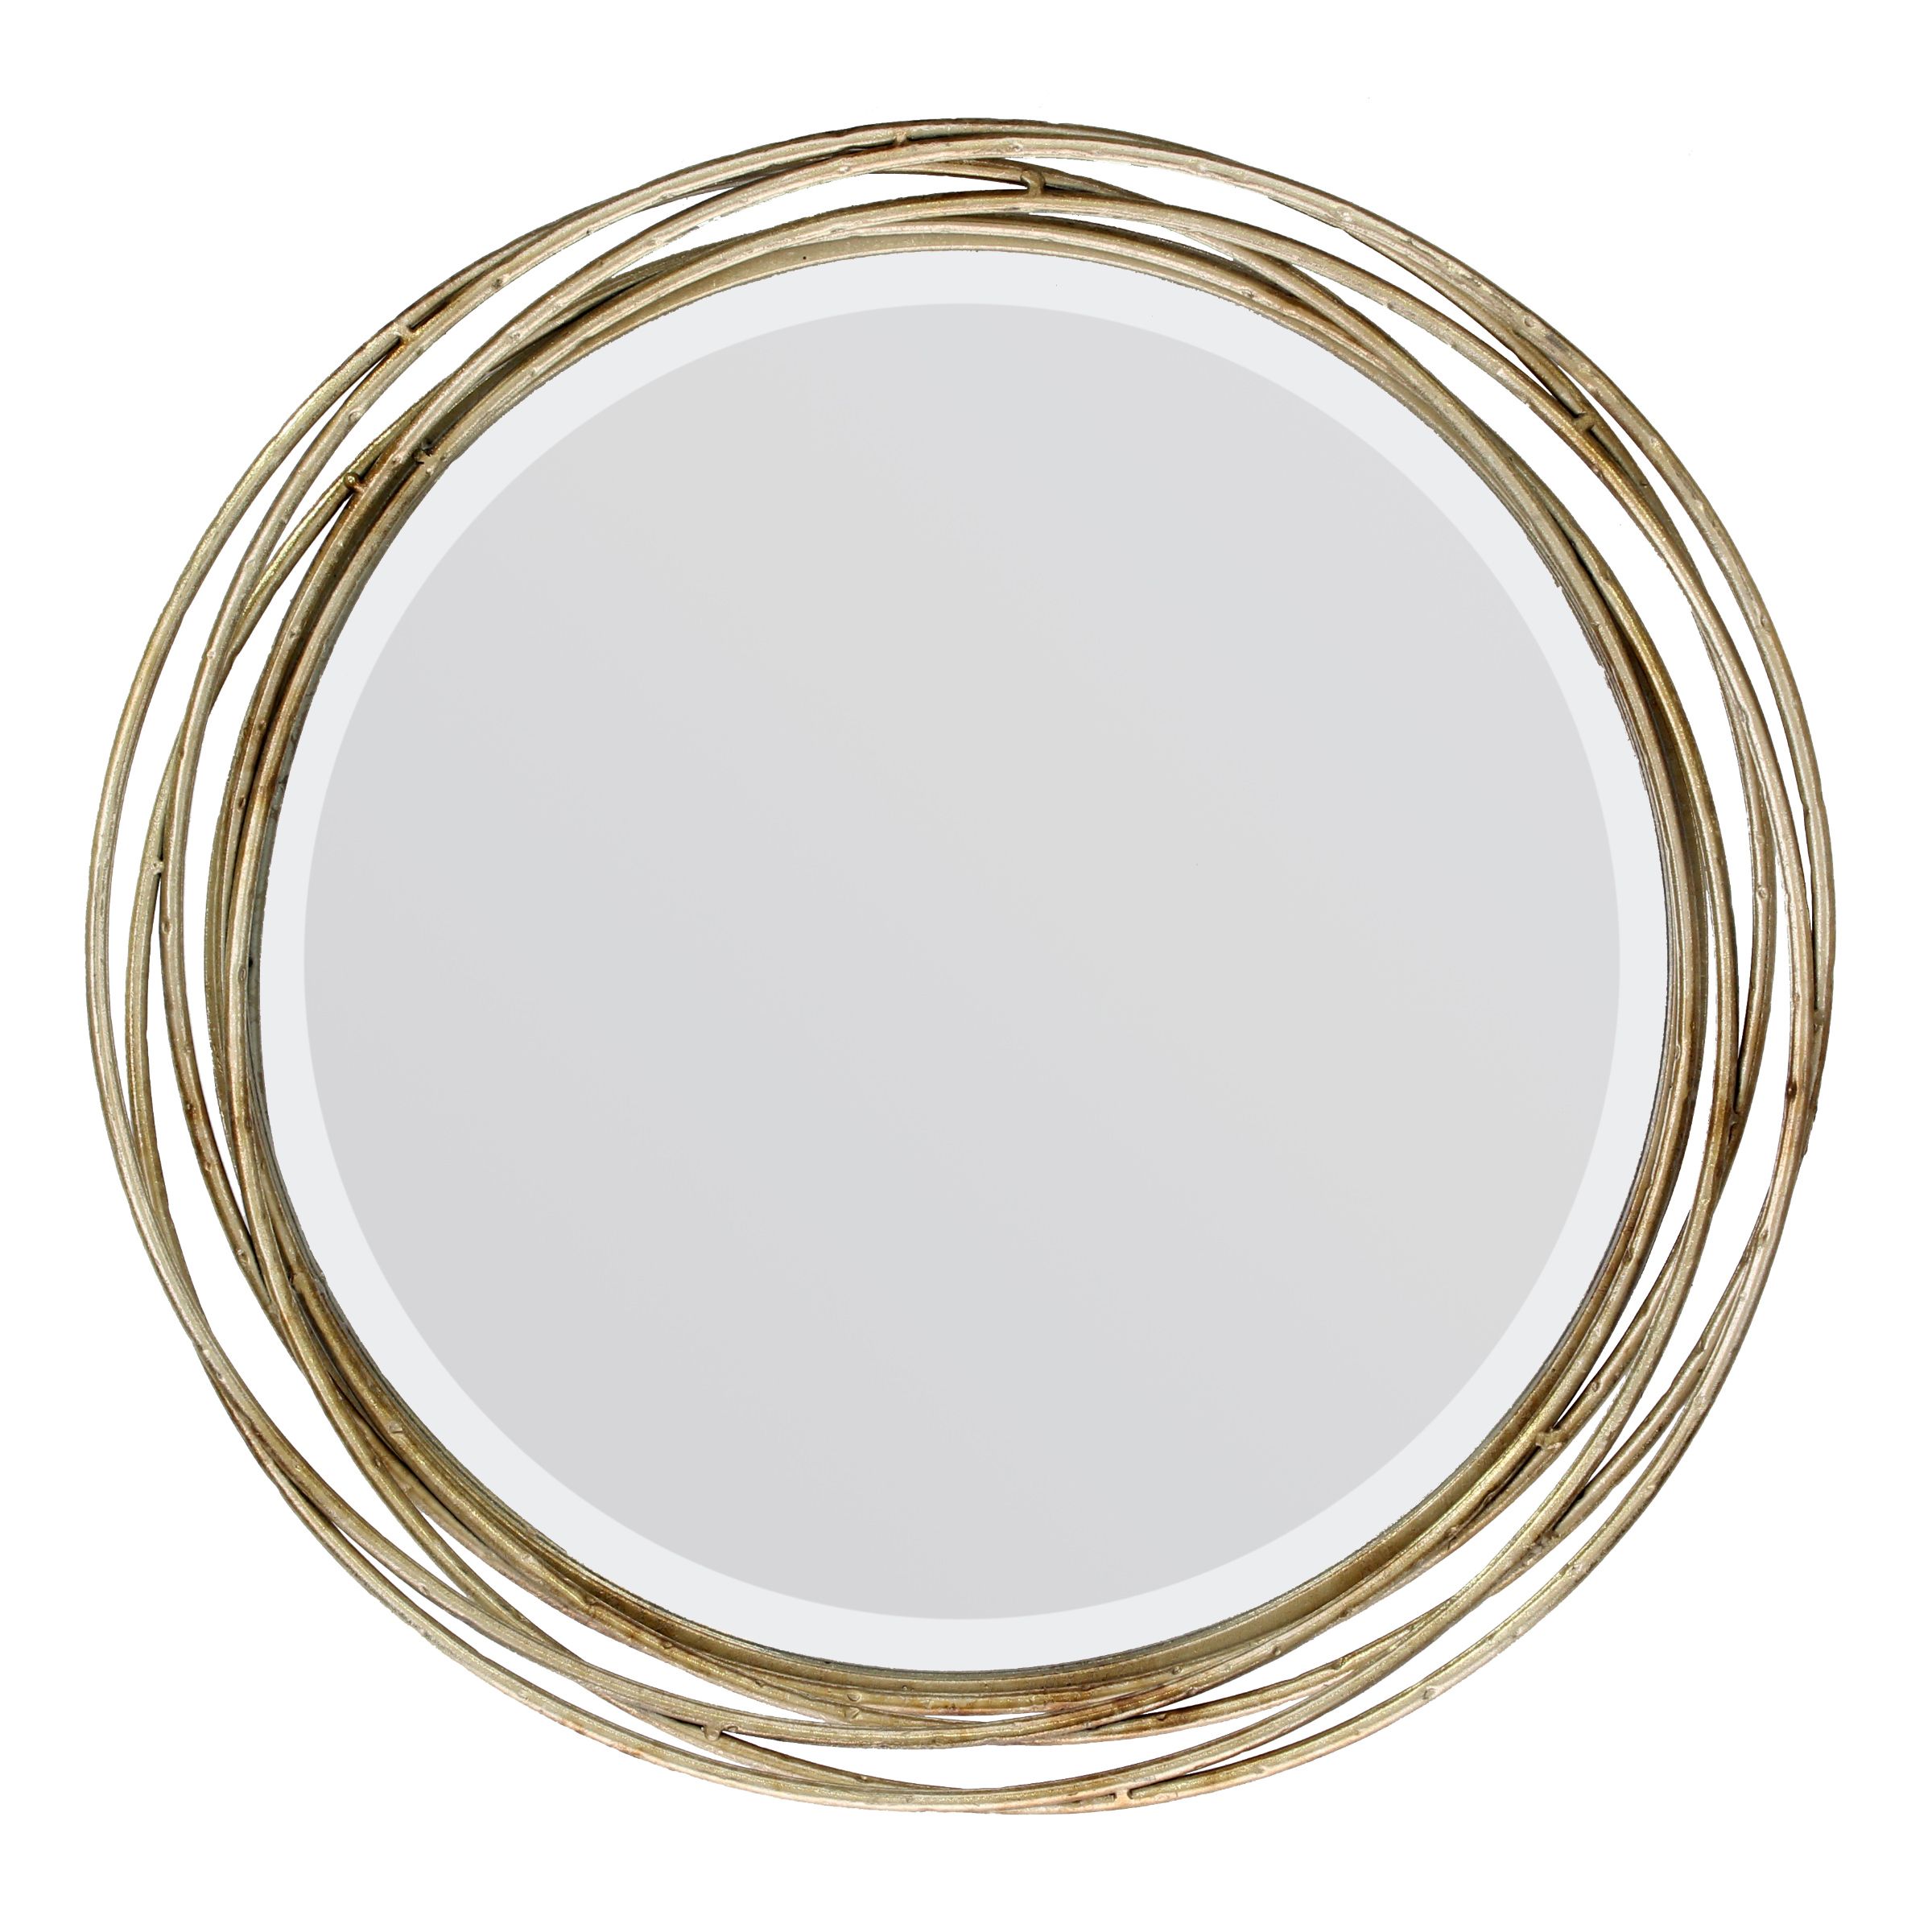 Better Homes And Gardens Round Metal Decorative Wall Mirror – Walmart With Regard To Tellier Accent Wall Mirrors (View 7 of 15)